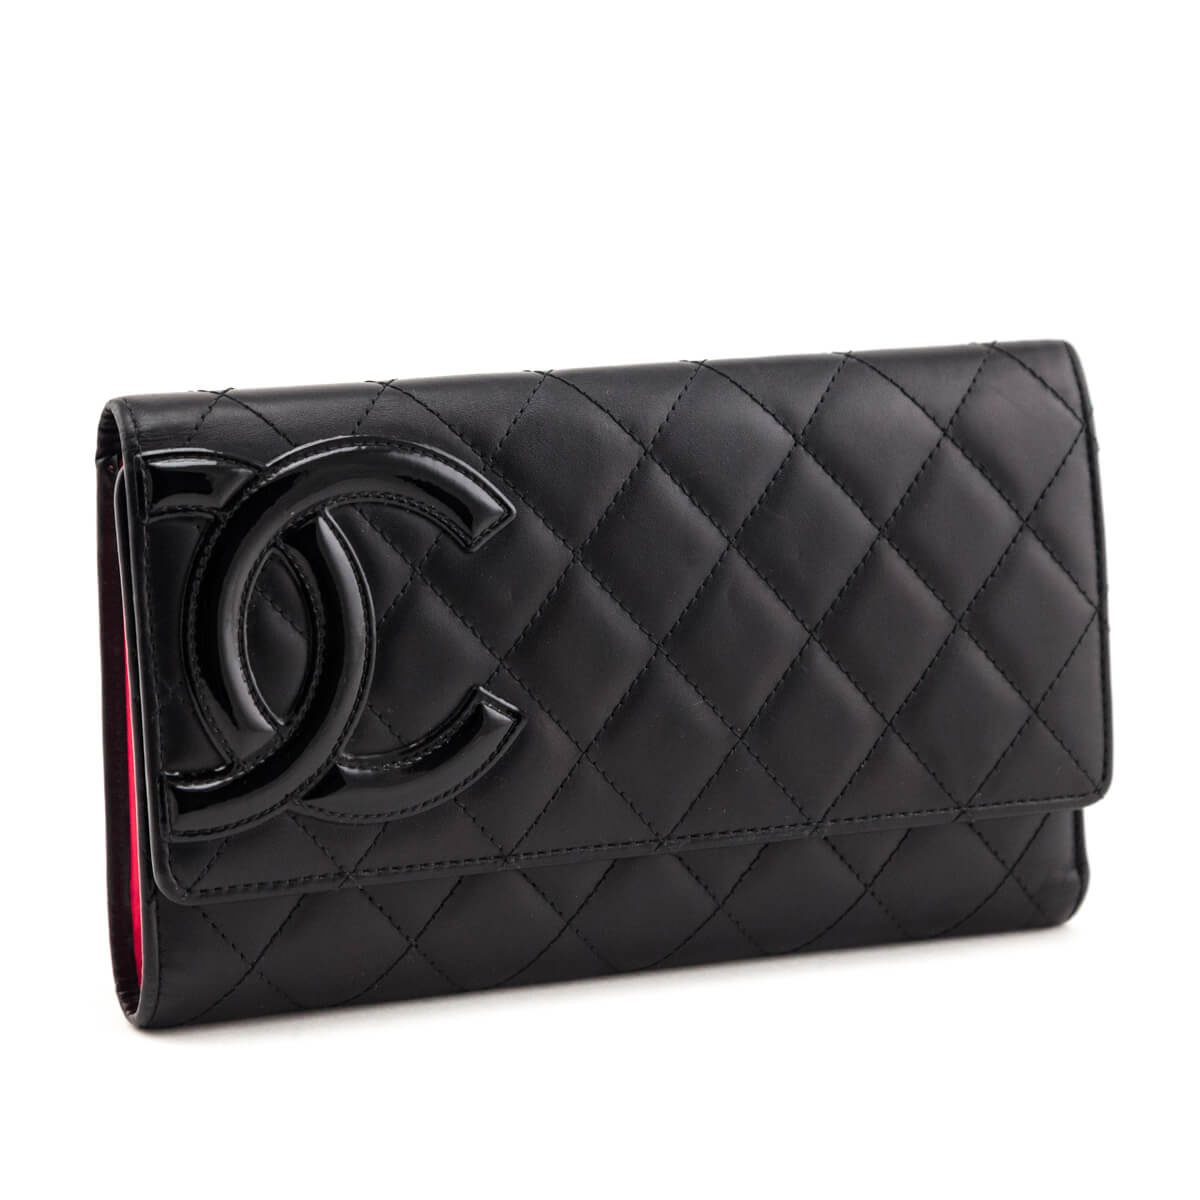 Chanel Black Quilted Calfskin Cambon Tri-Fold Wallet - Love that Bag etc - Preowned Authentic Designer Handbags & Preloved Fashions